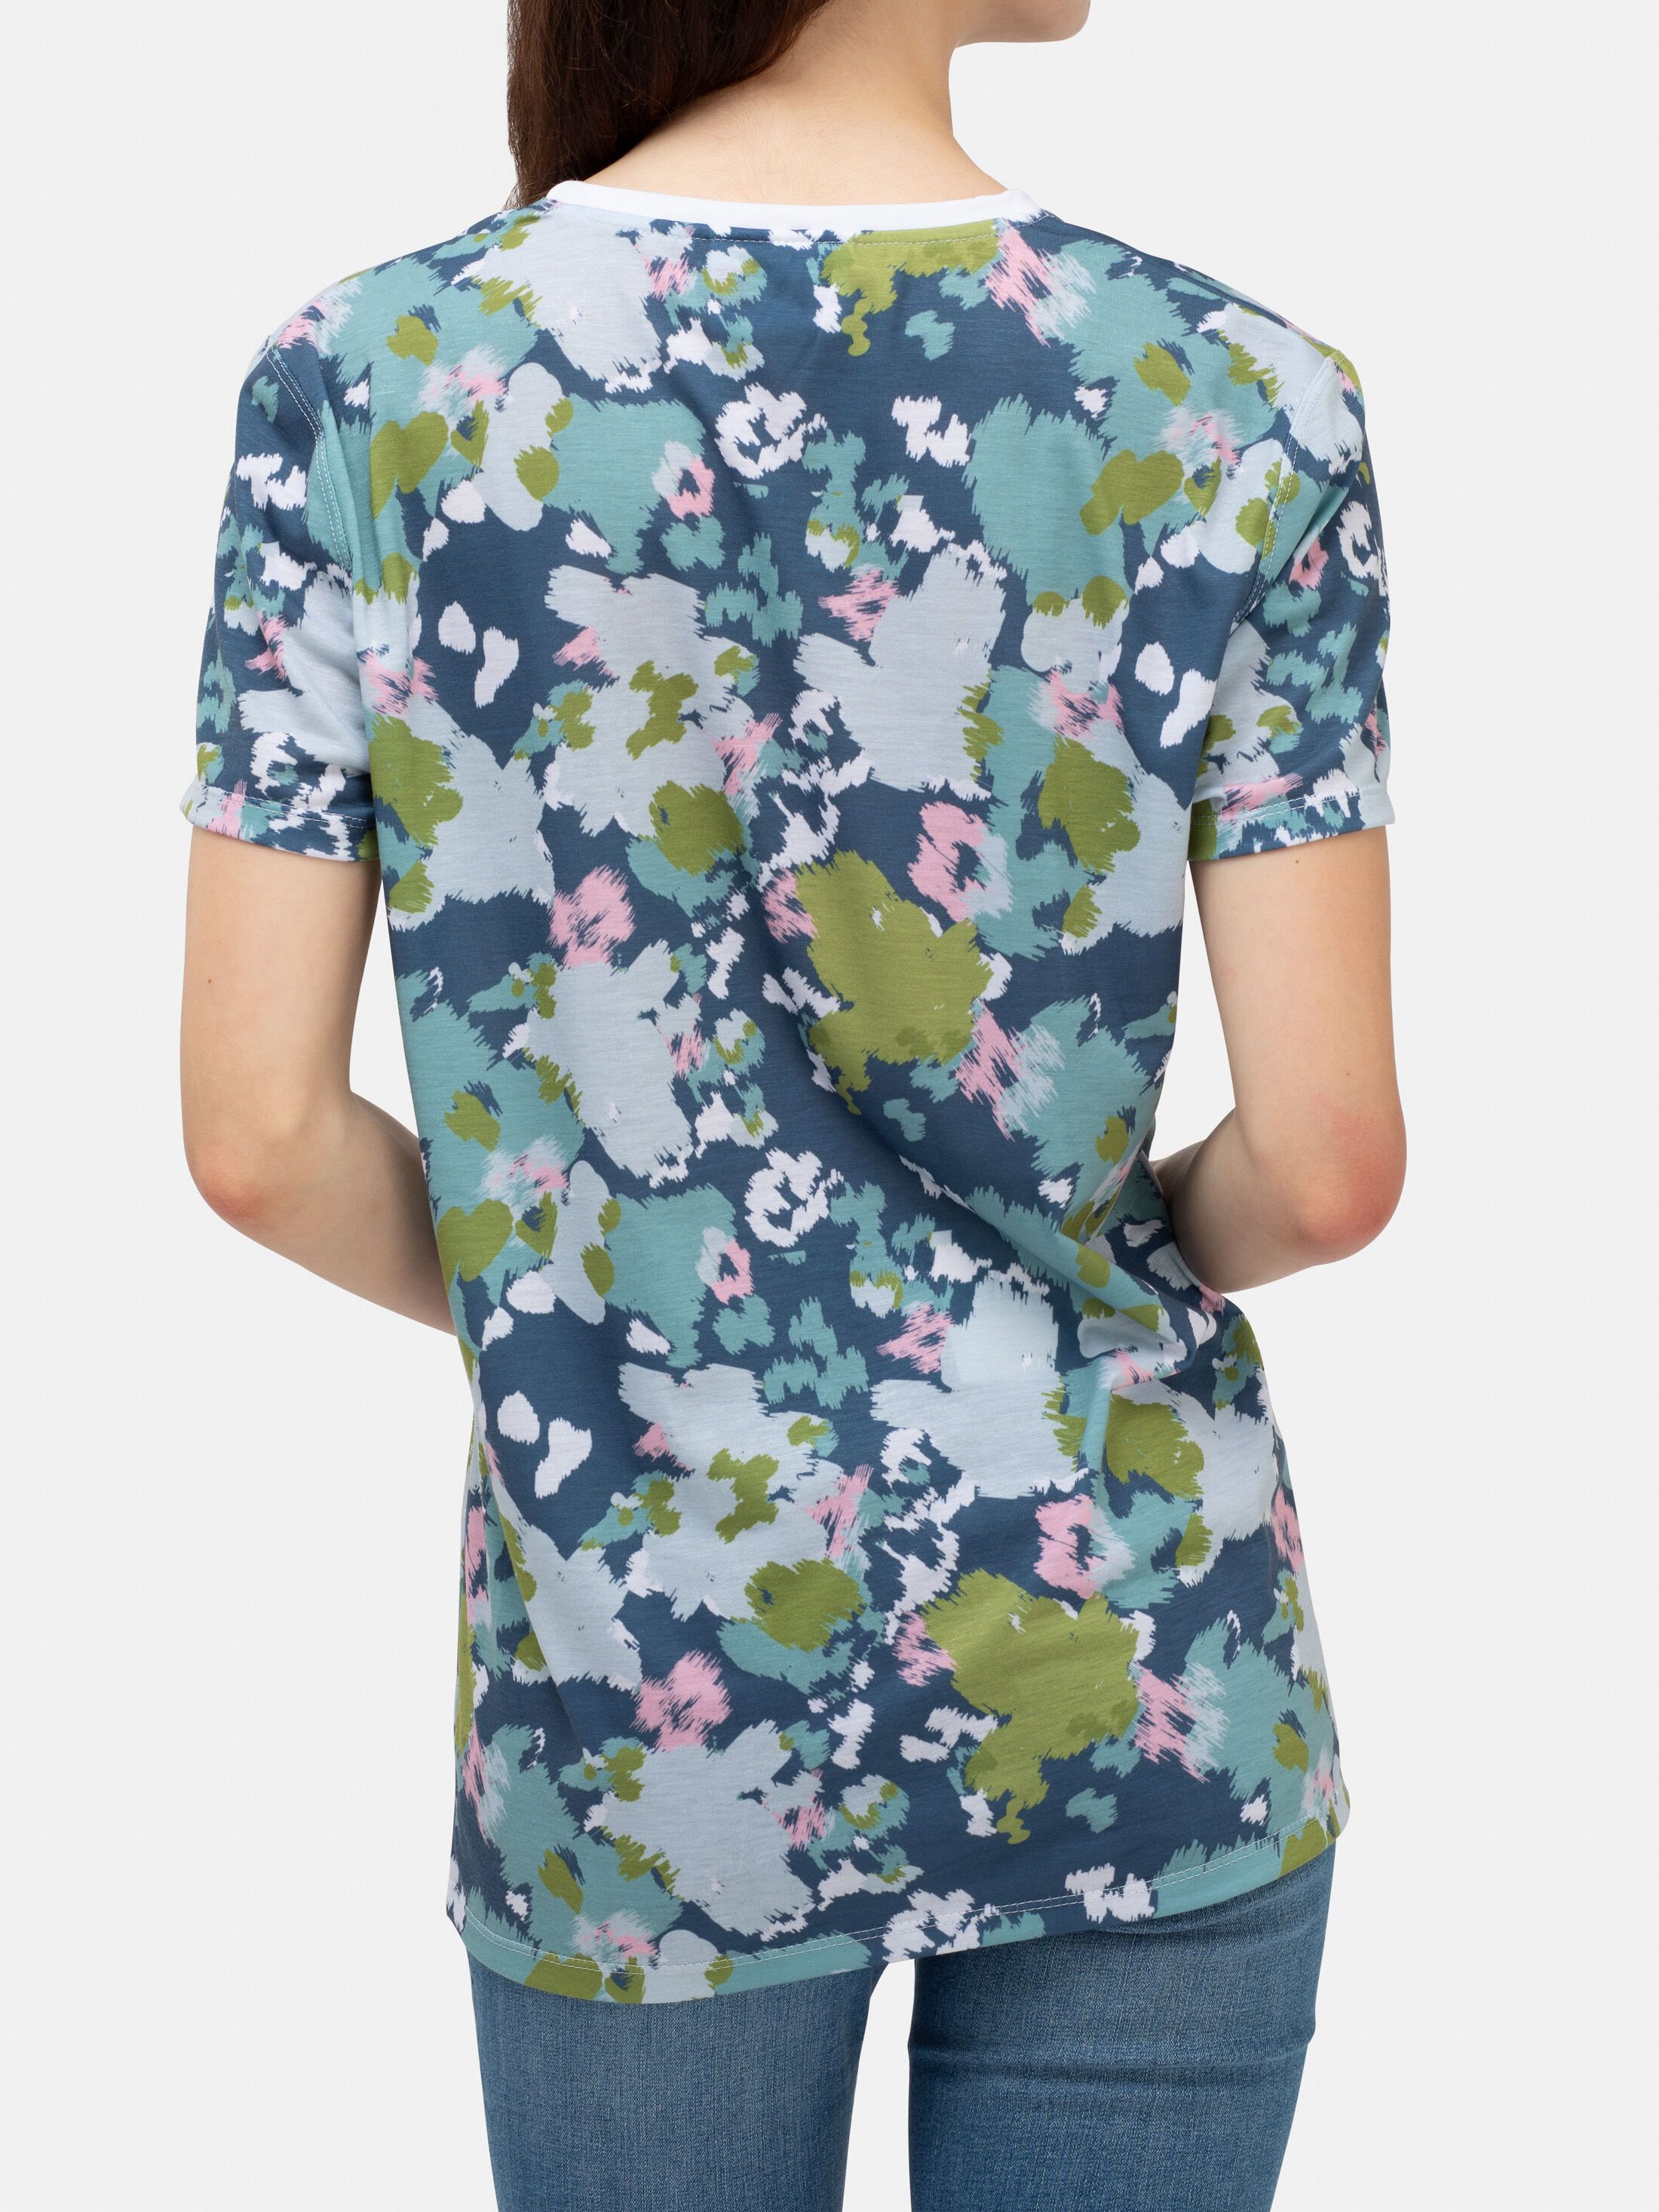 Explore All Over Printing Shirts Trend